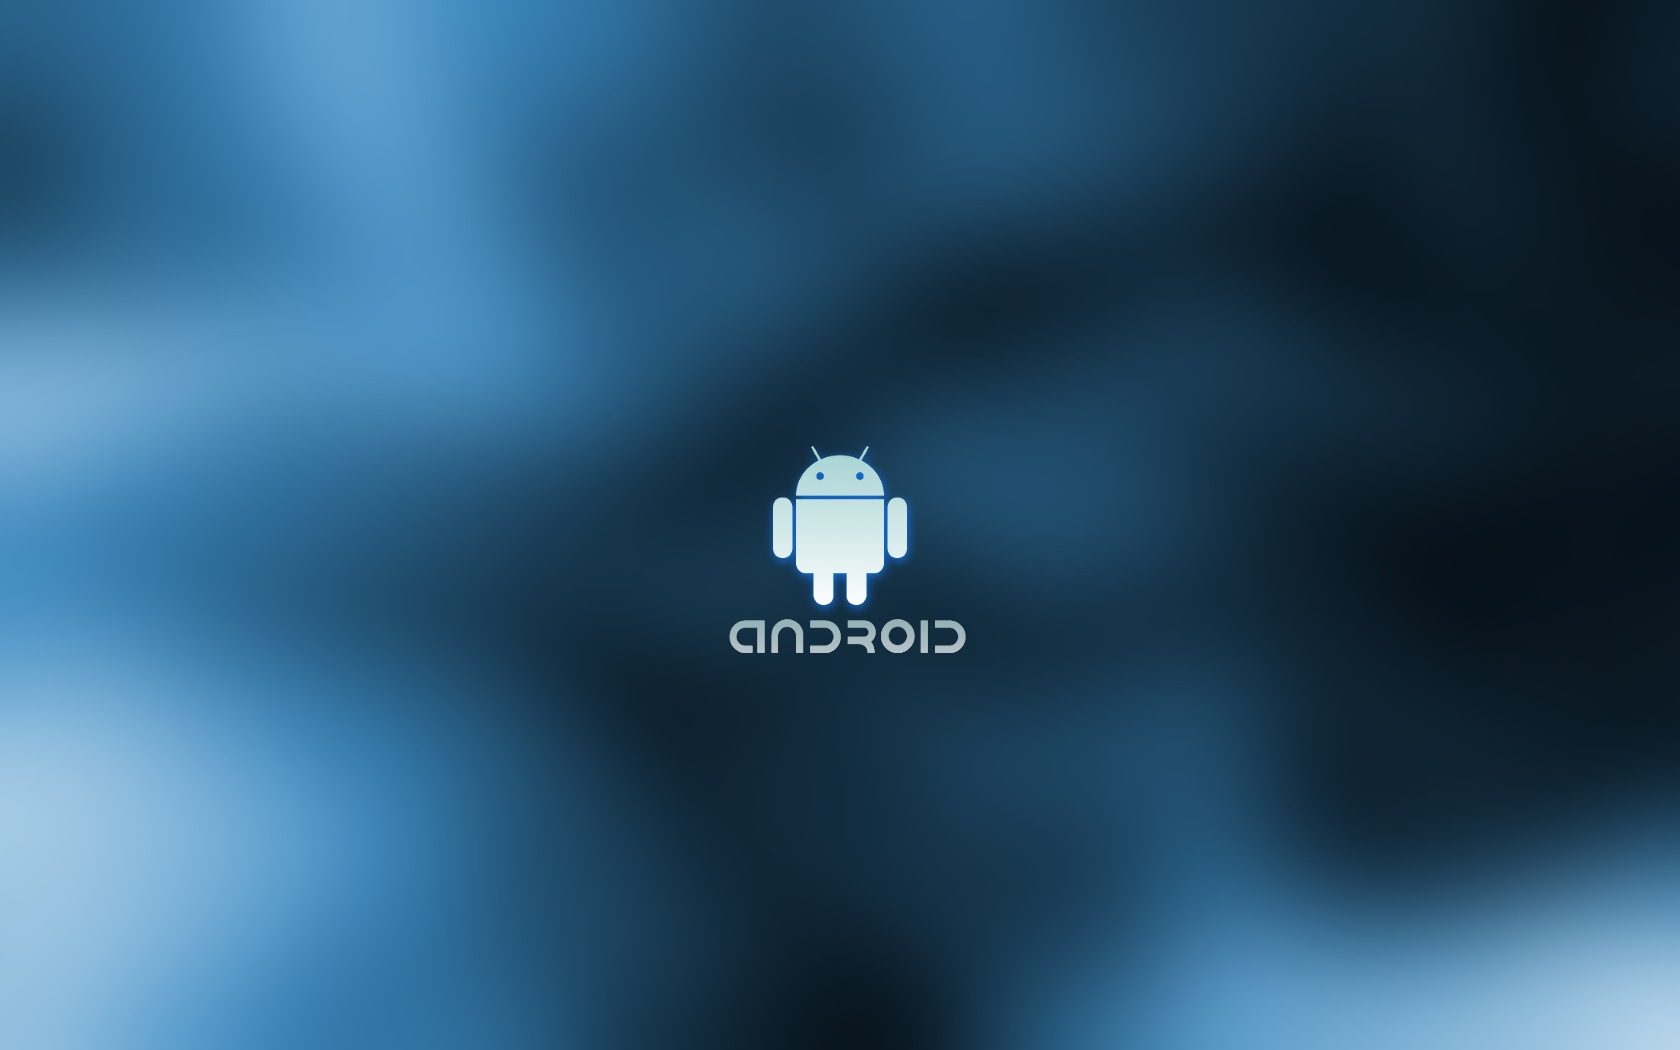 New Blue And Black Android Wallpaper Background Wallpaper with 1680x1050